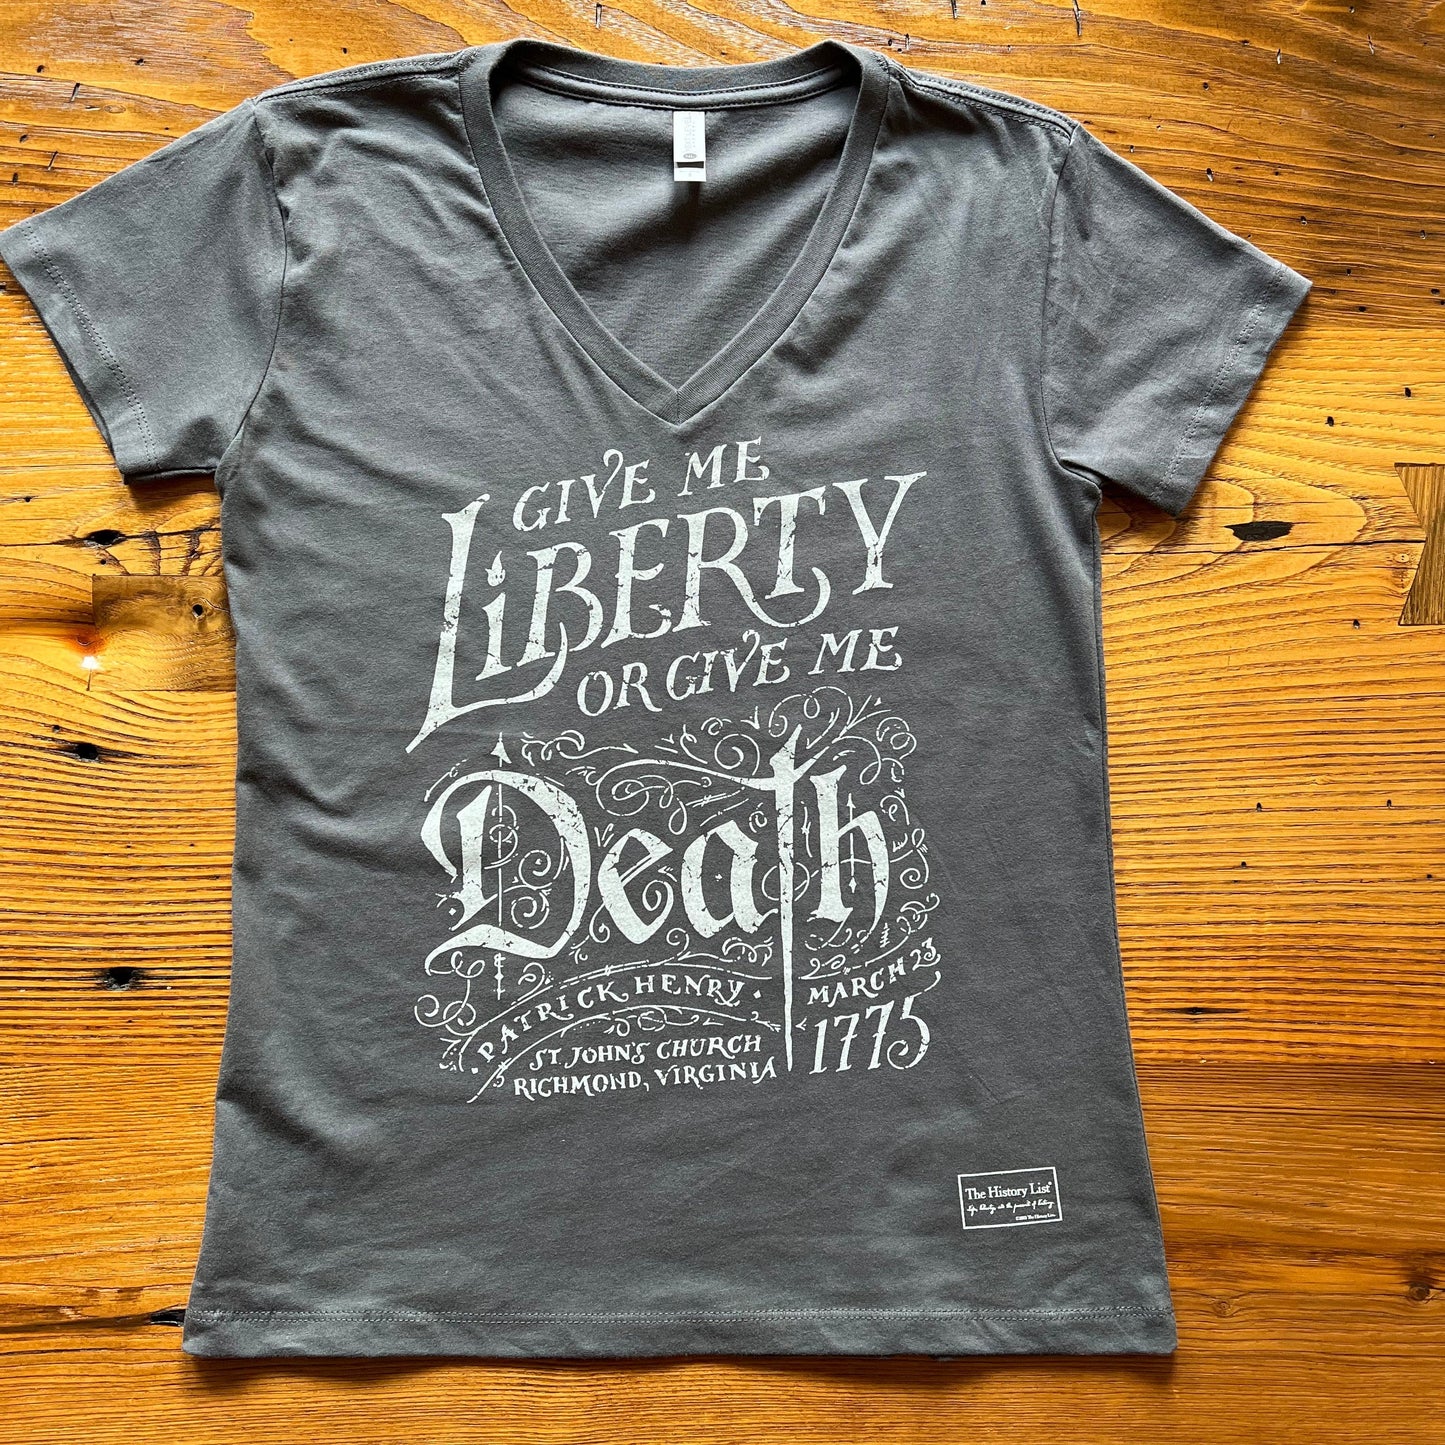 "Give me liberty, or give me death!" Women's v-neck shirt from the history list store